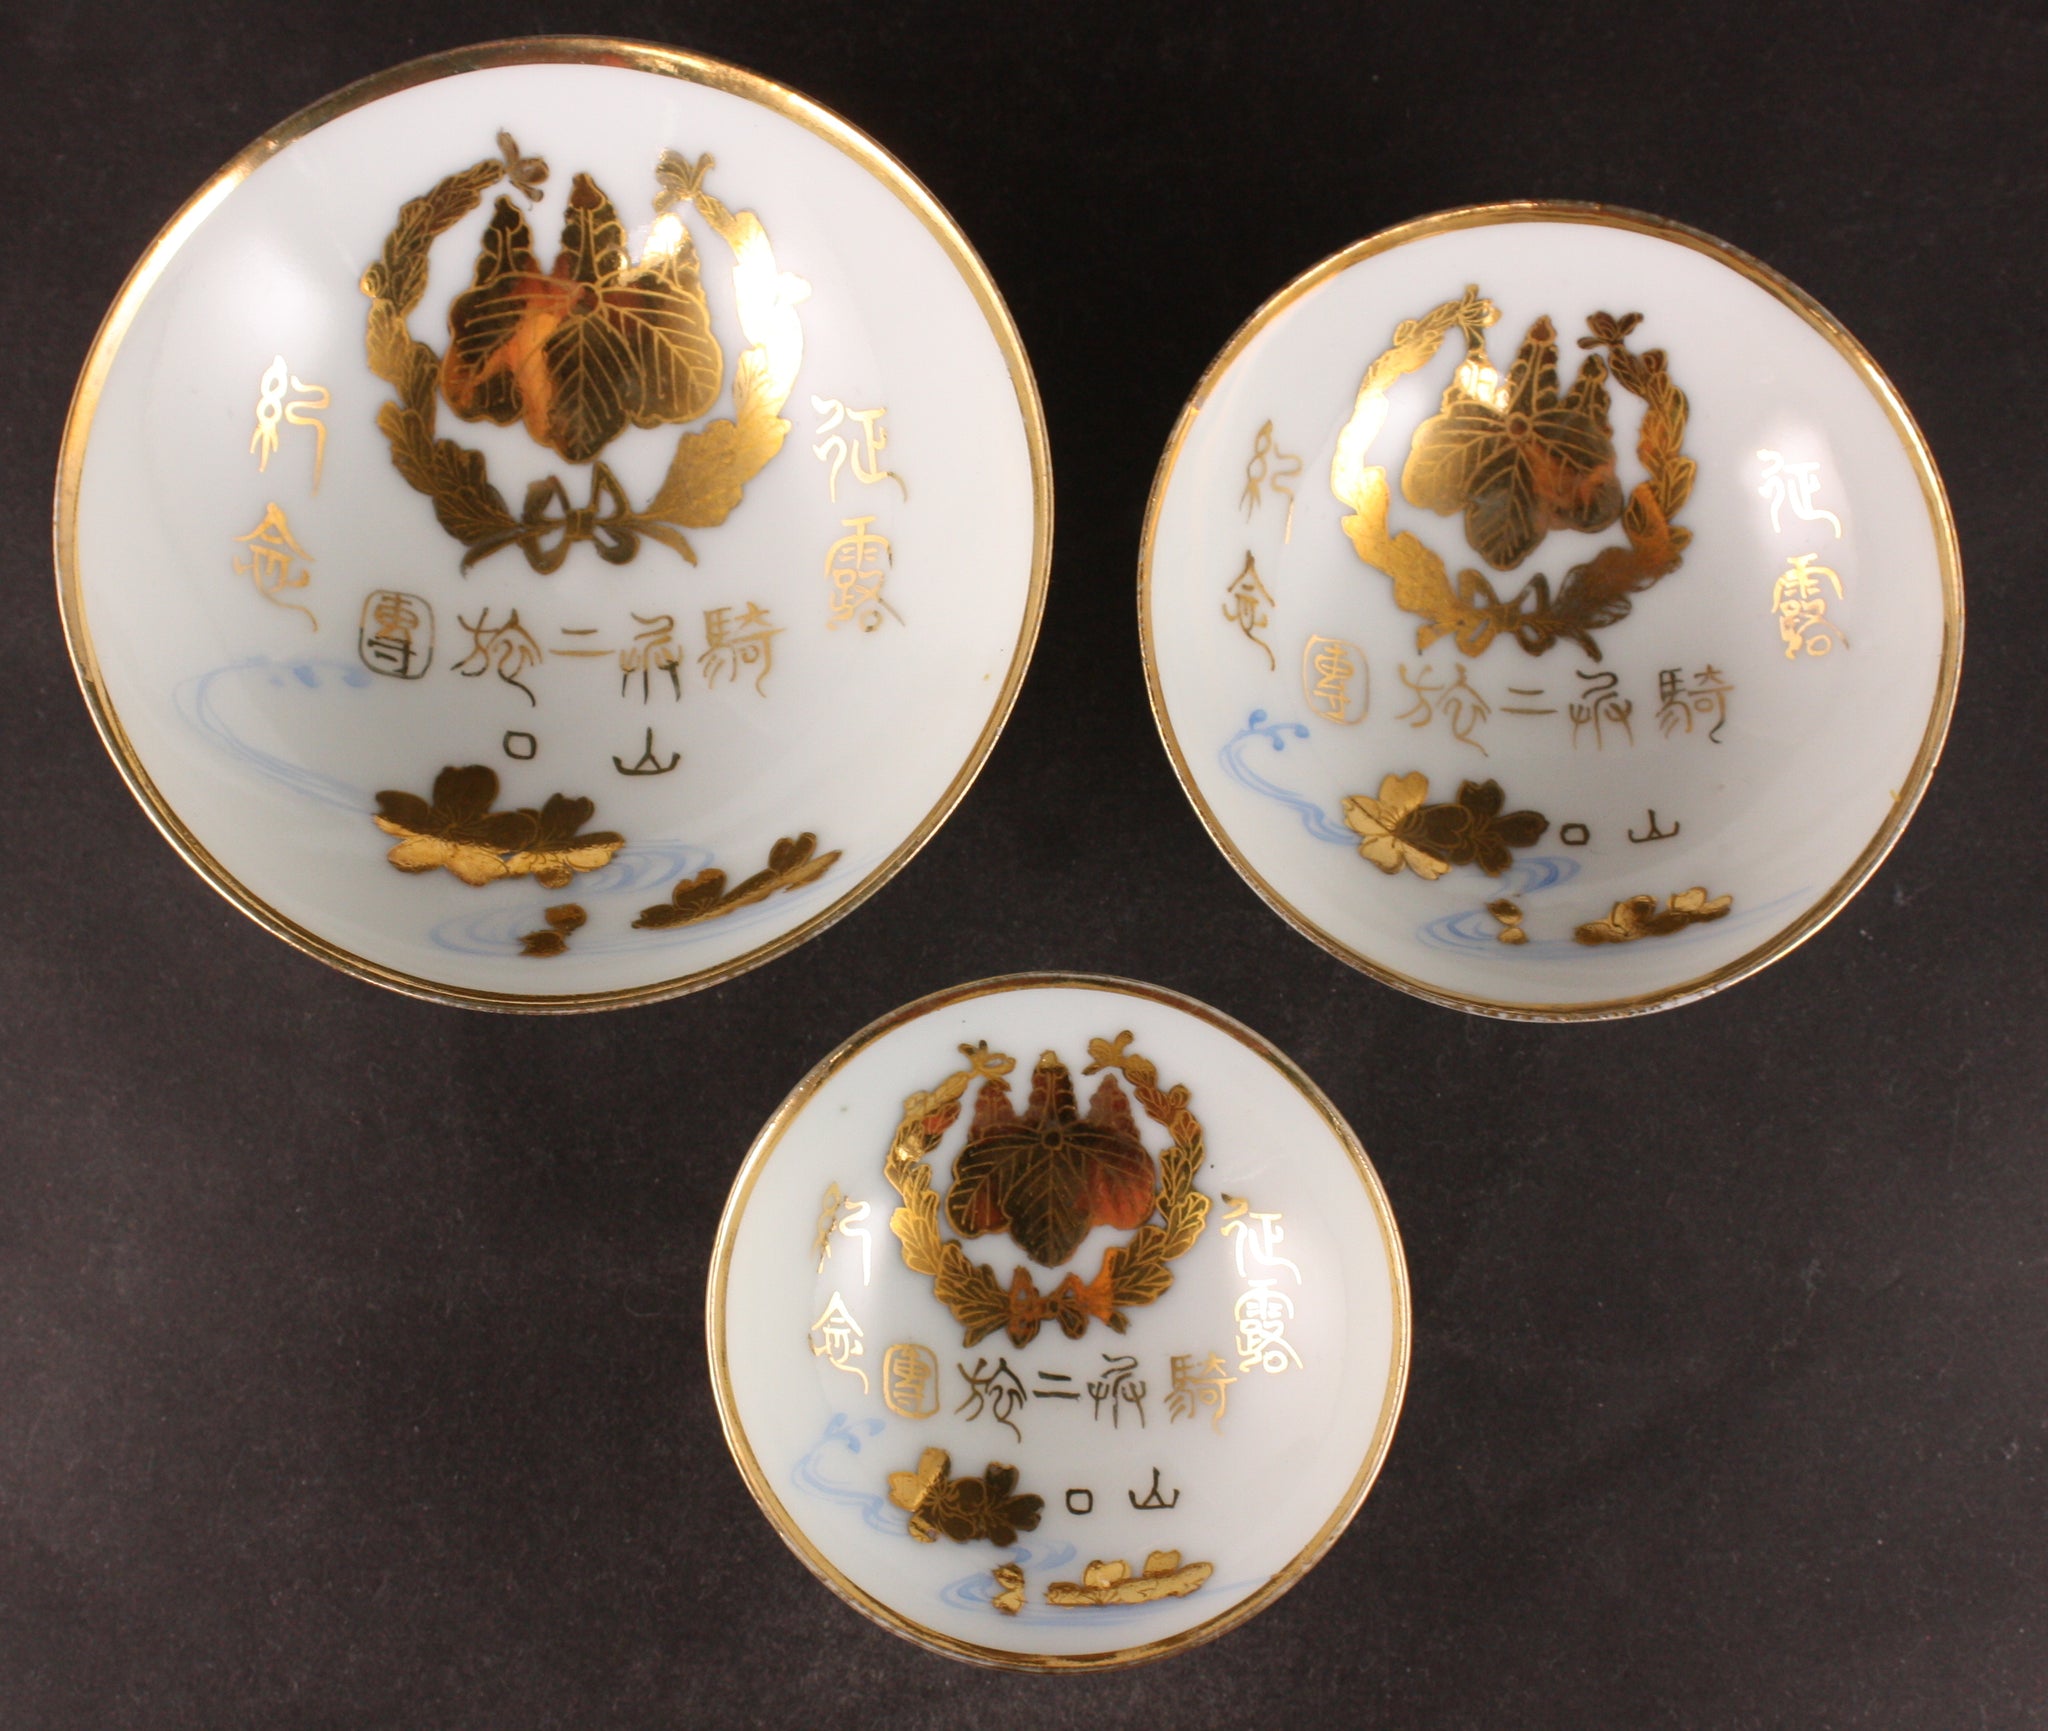 Set of 3 Russo Japanese War Cavalry Brigade Army Sake Cups